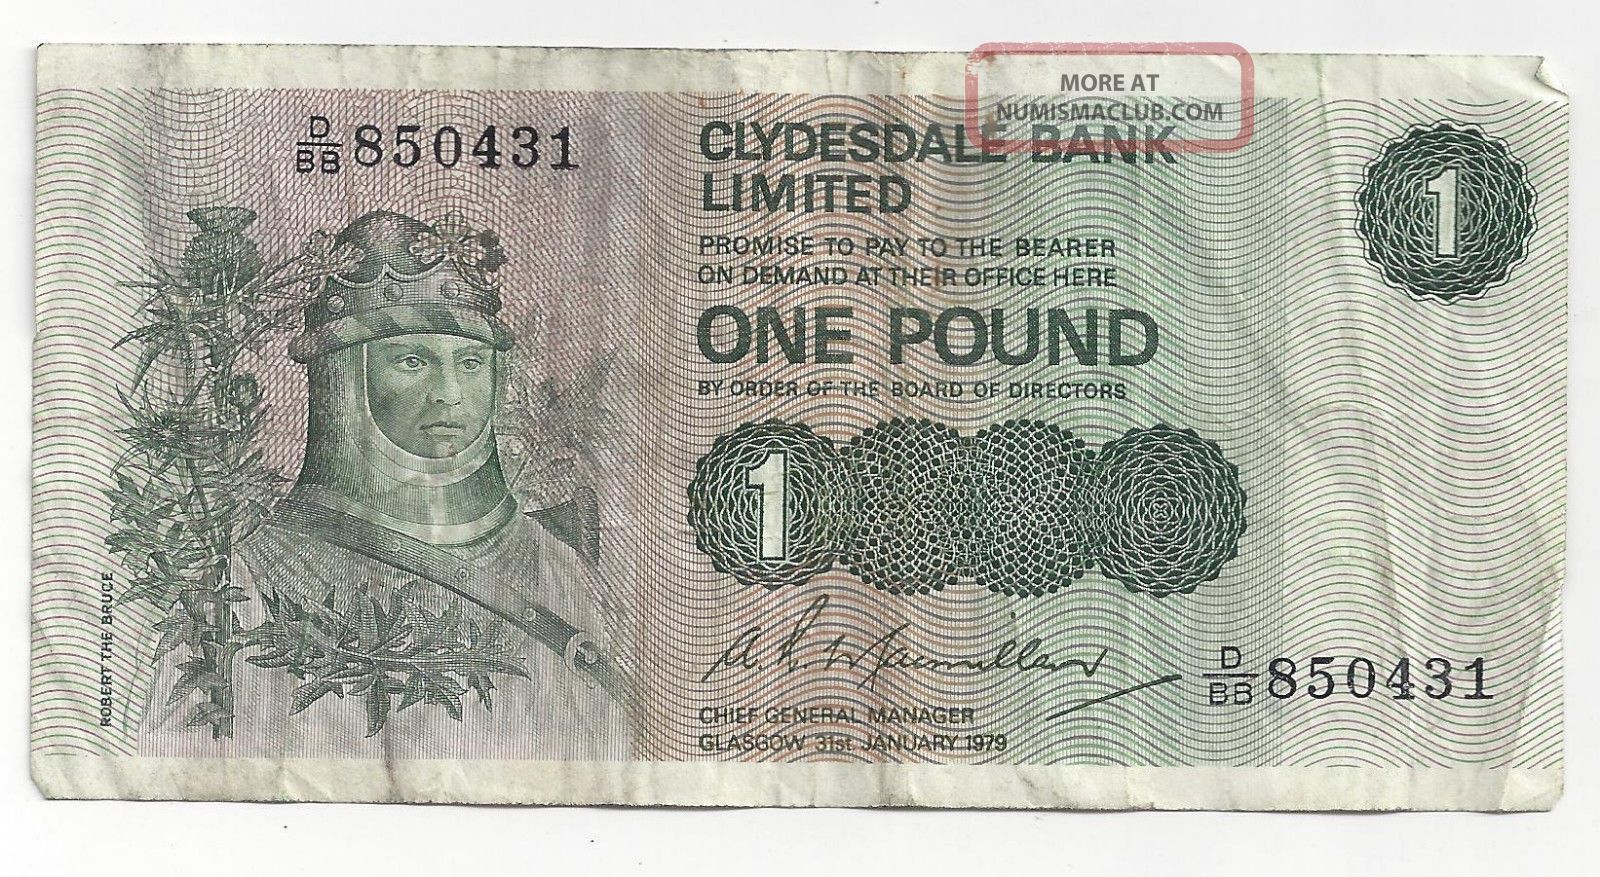 Scotland Clydesdale Bank Limited 1 Pound Note Dated 1979 S&h